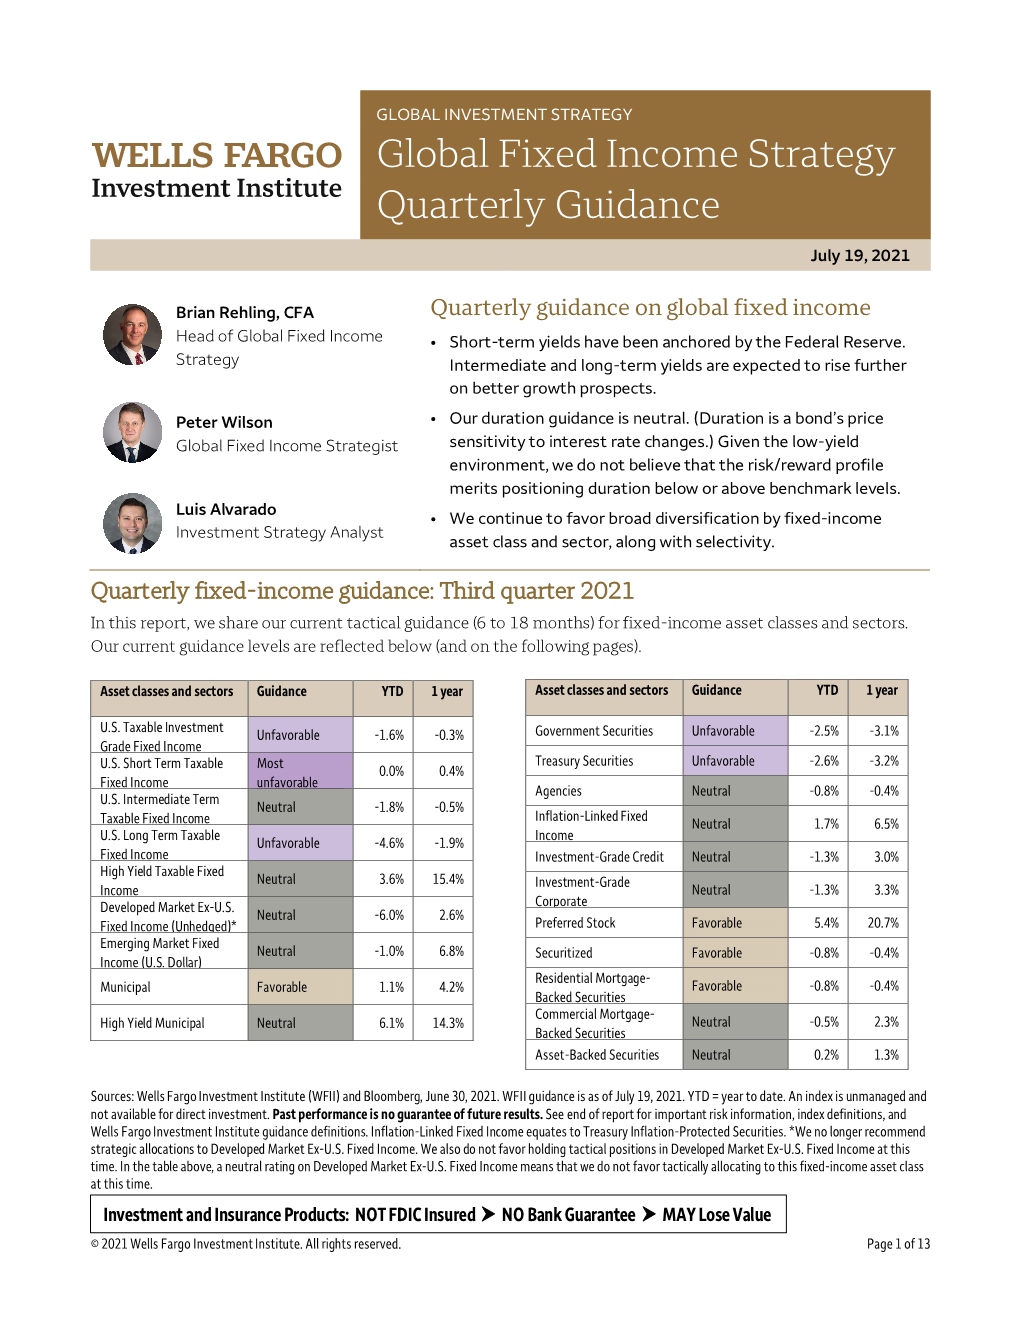 Global Fixed Income Strategy Quarterly Guidance